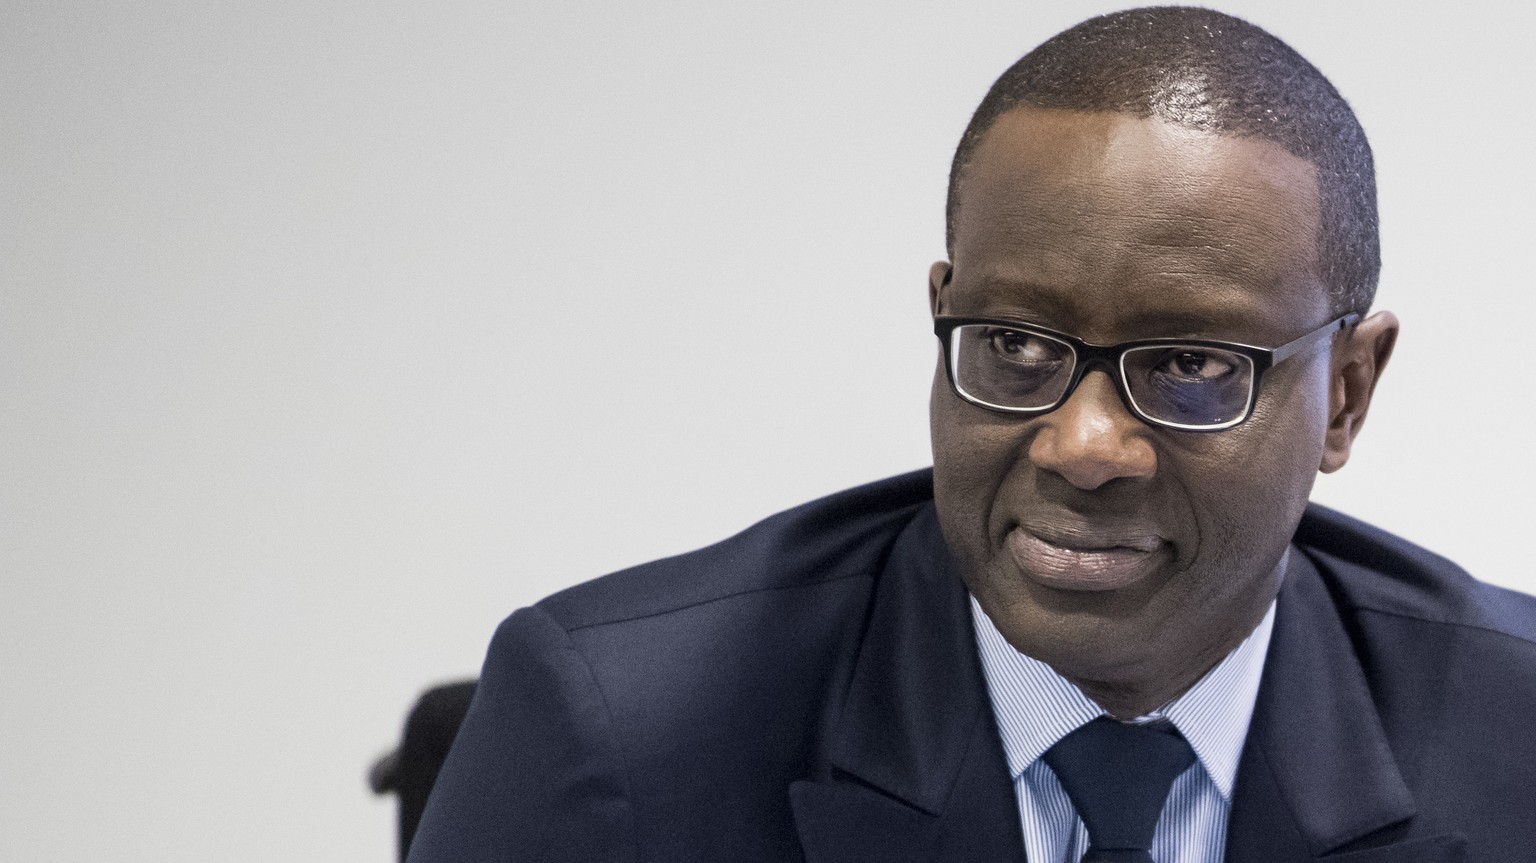 Tidjane Thiam, CEO of Swiss bank Credit Suisse, smiles prior to the press conference of the full-year results of 2017 in Zurich, Switzerland, Wednesday, Feb. 14, 2018. (Ennio Leanza/Keystone via AP)